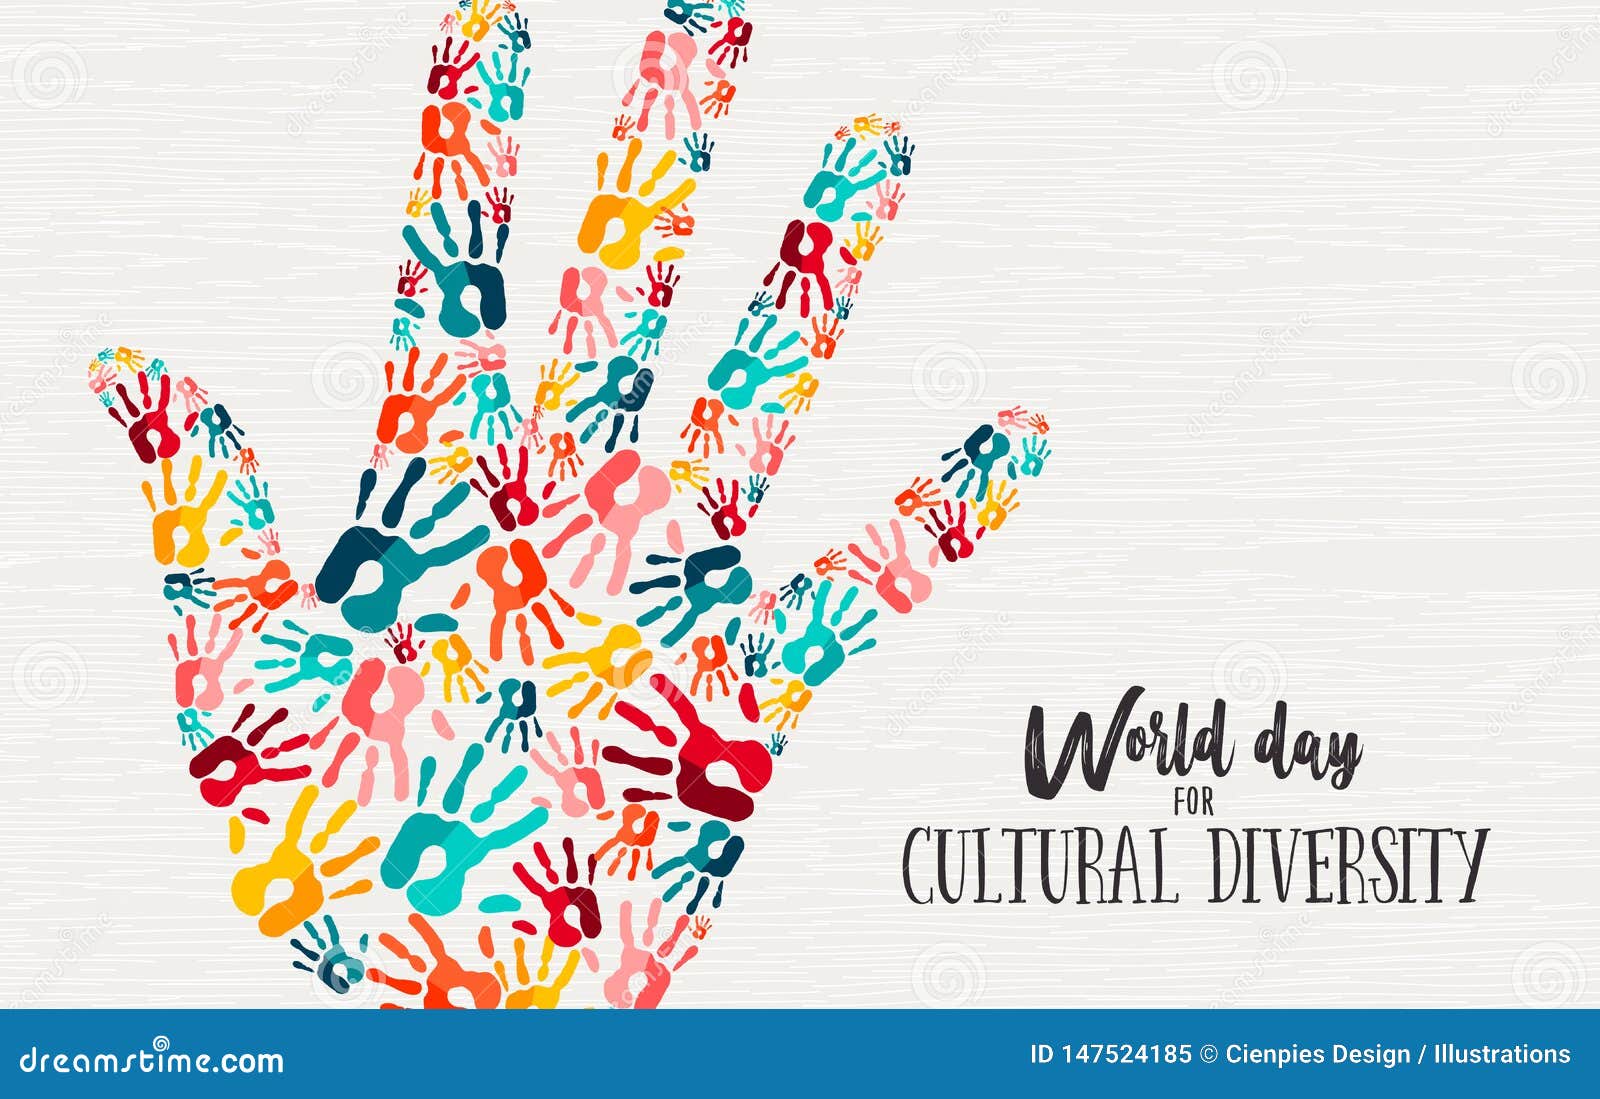 cultural diversity day diverse hand concept card